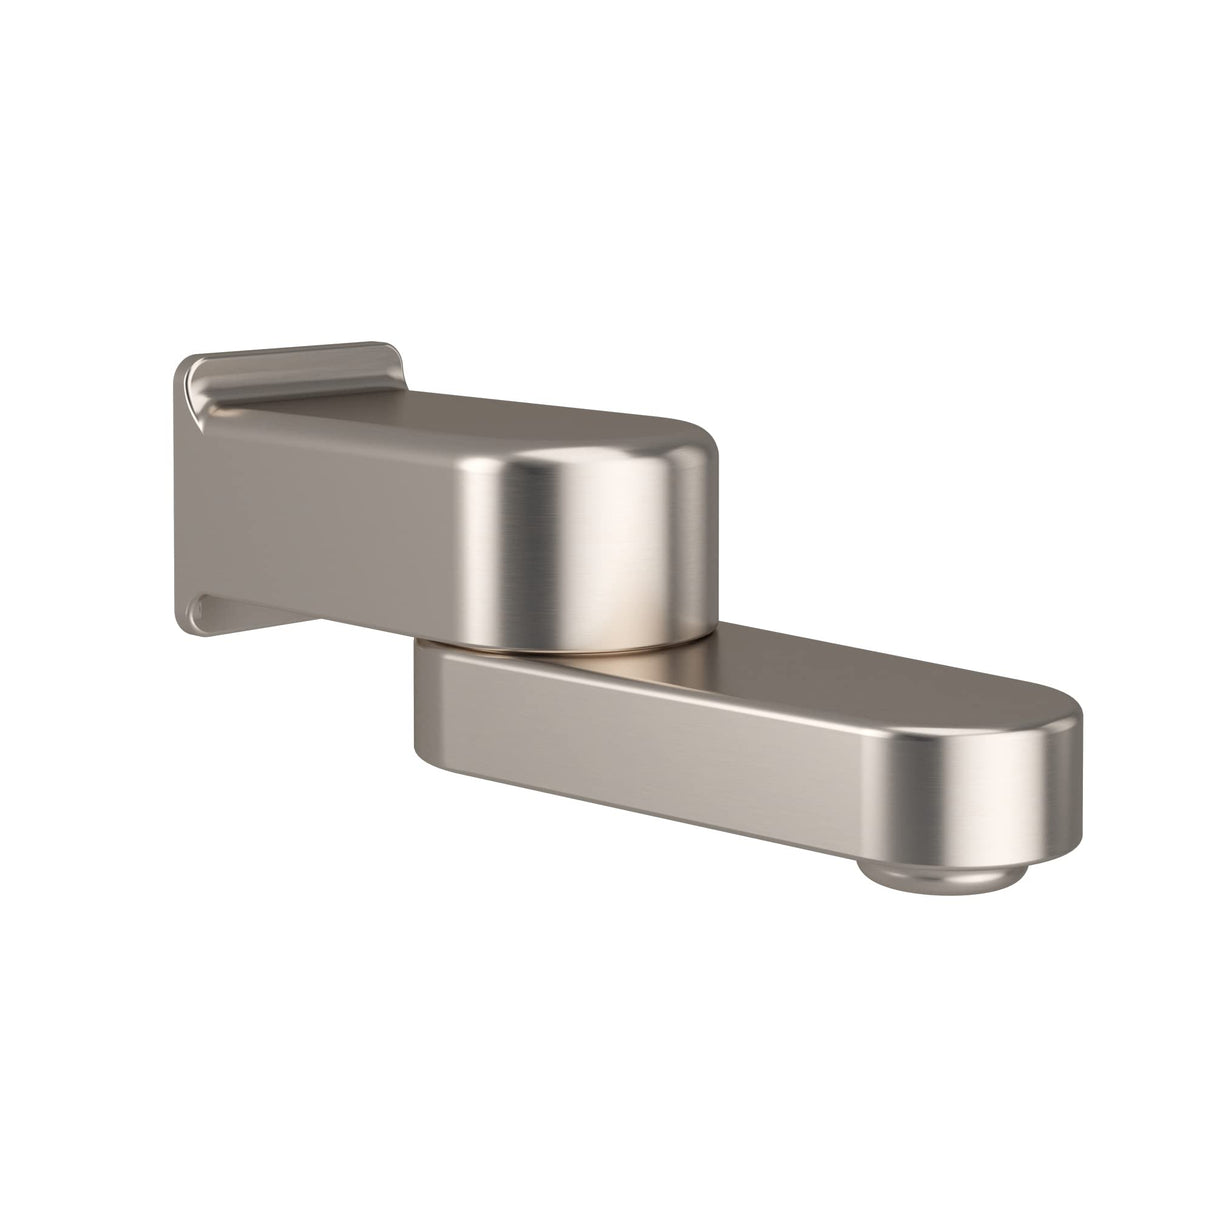 PULSE ShowerSpas 3011-TS-BN Fold Away Tub Spout and Diverter, 1/2" NPT Connection, Brushed-Nickel